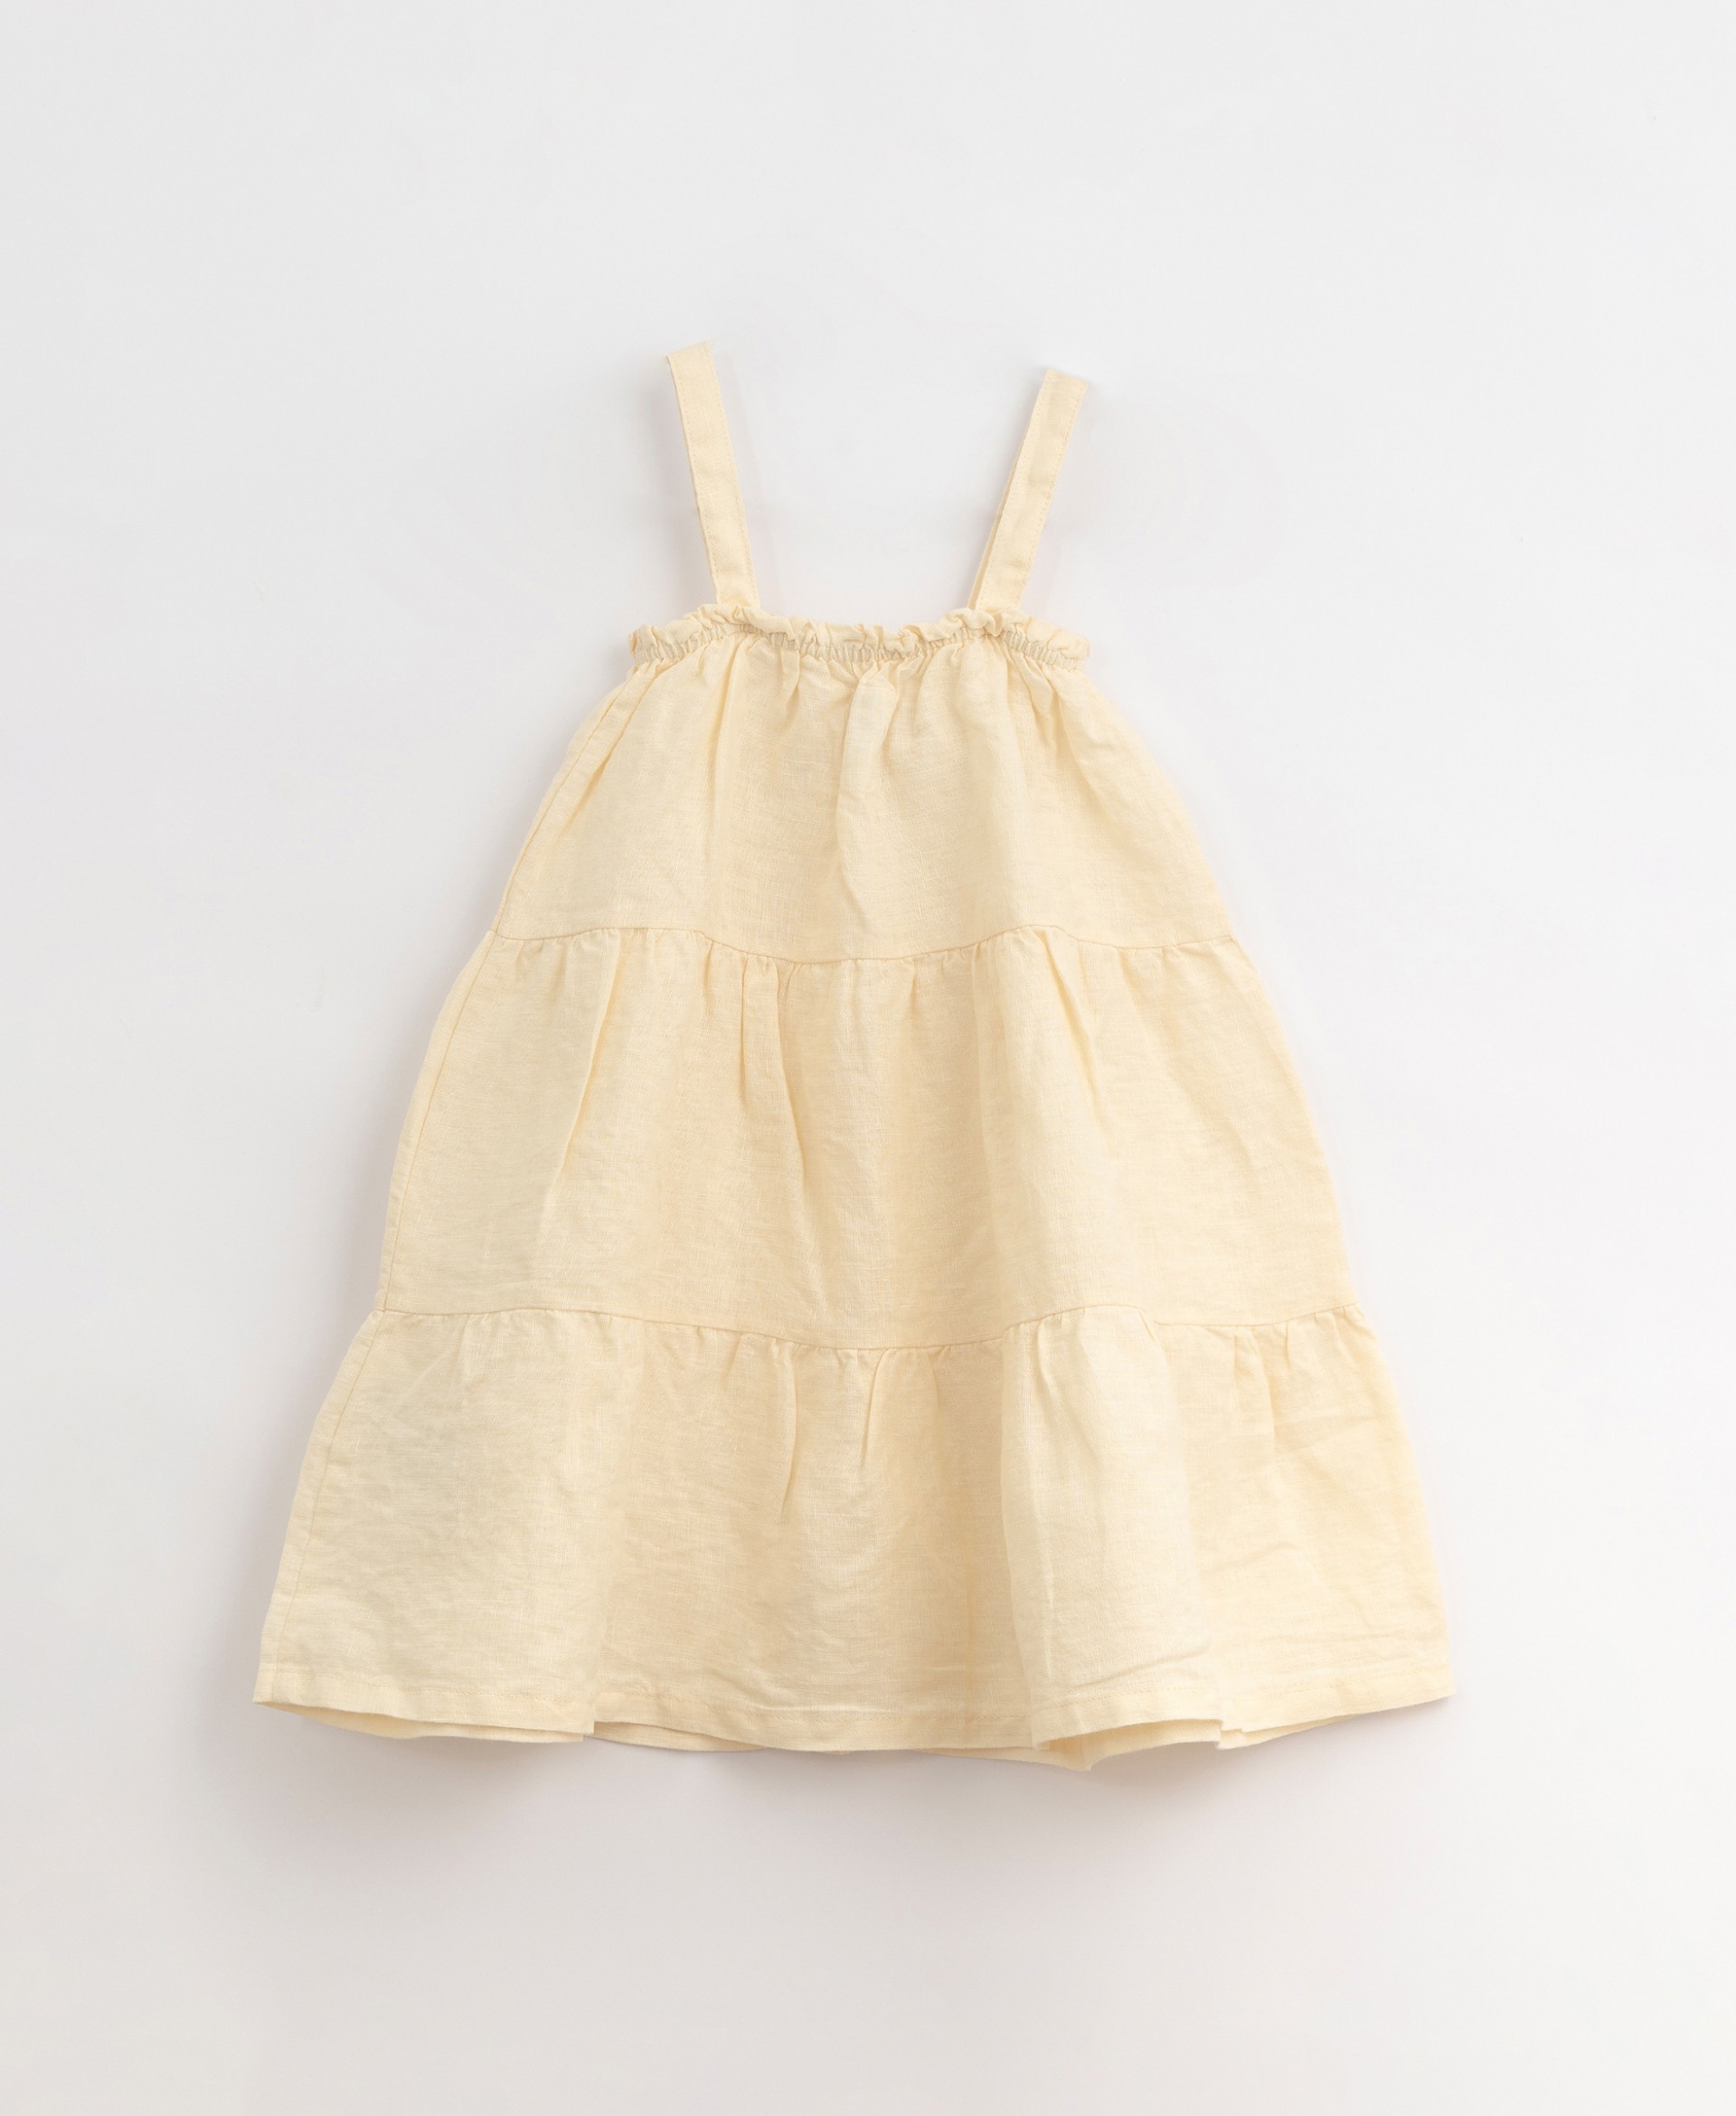 Linen dress with front opening | Organic Care